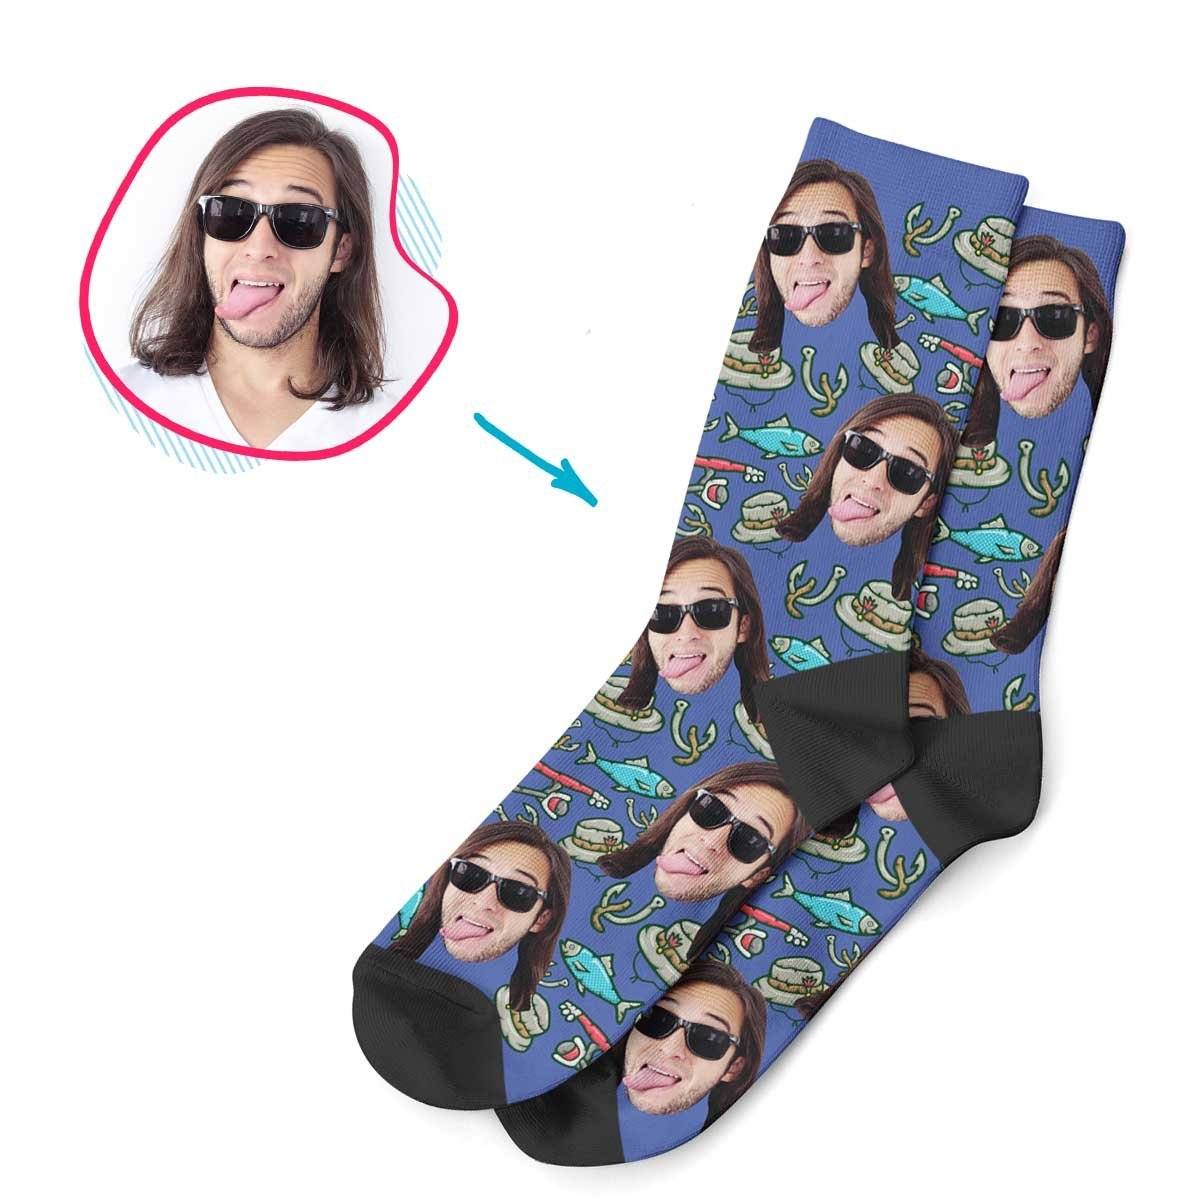 Darkblue Fishing personalized socks with photo of face printed on them